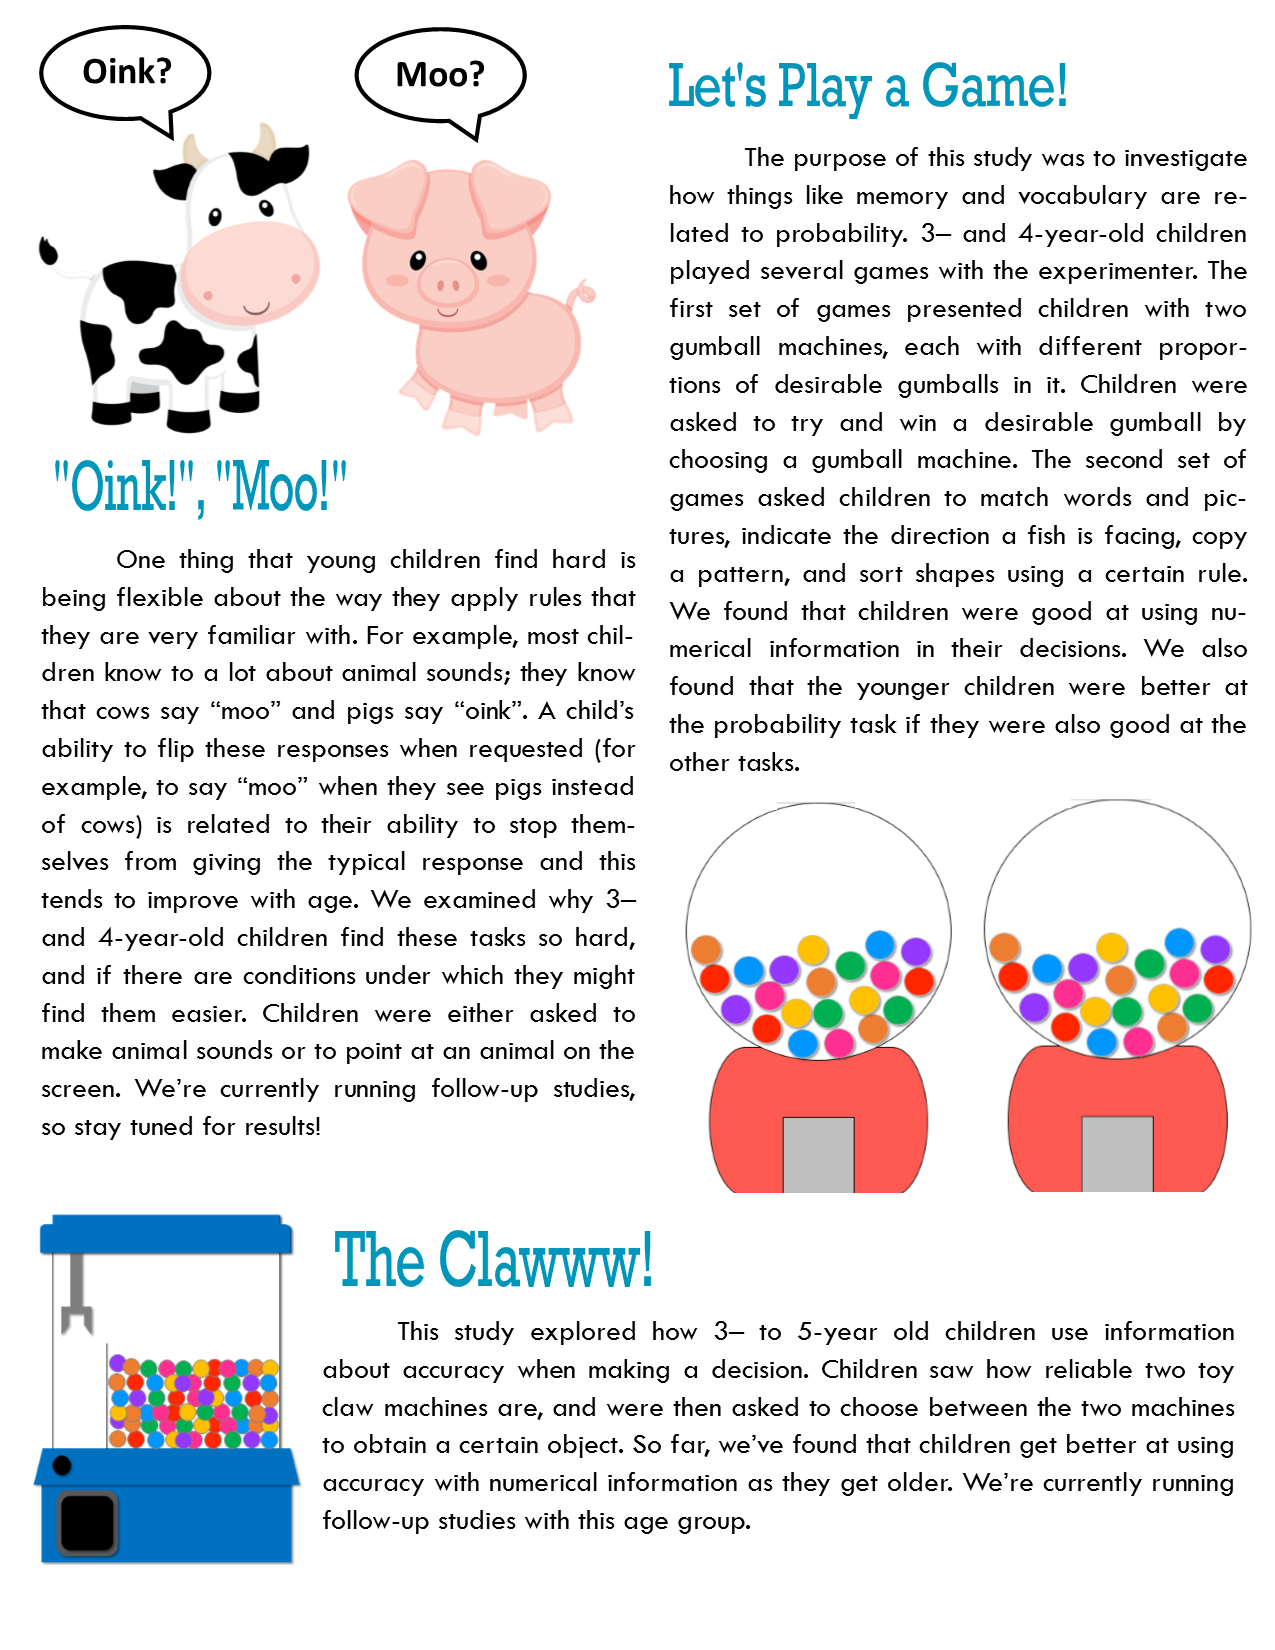 Third page of newsletter